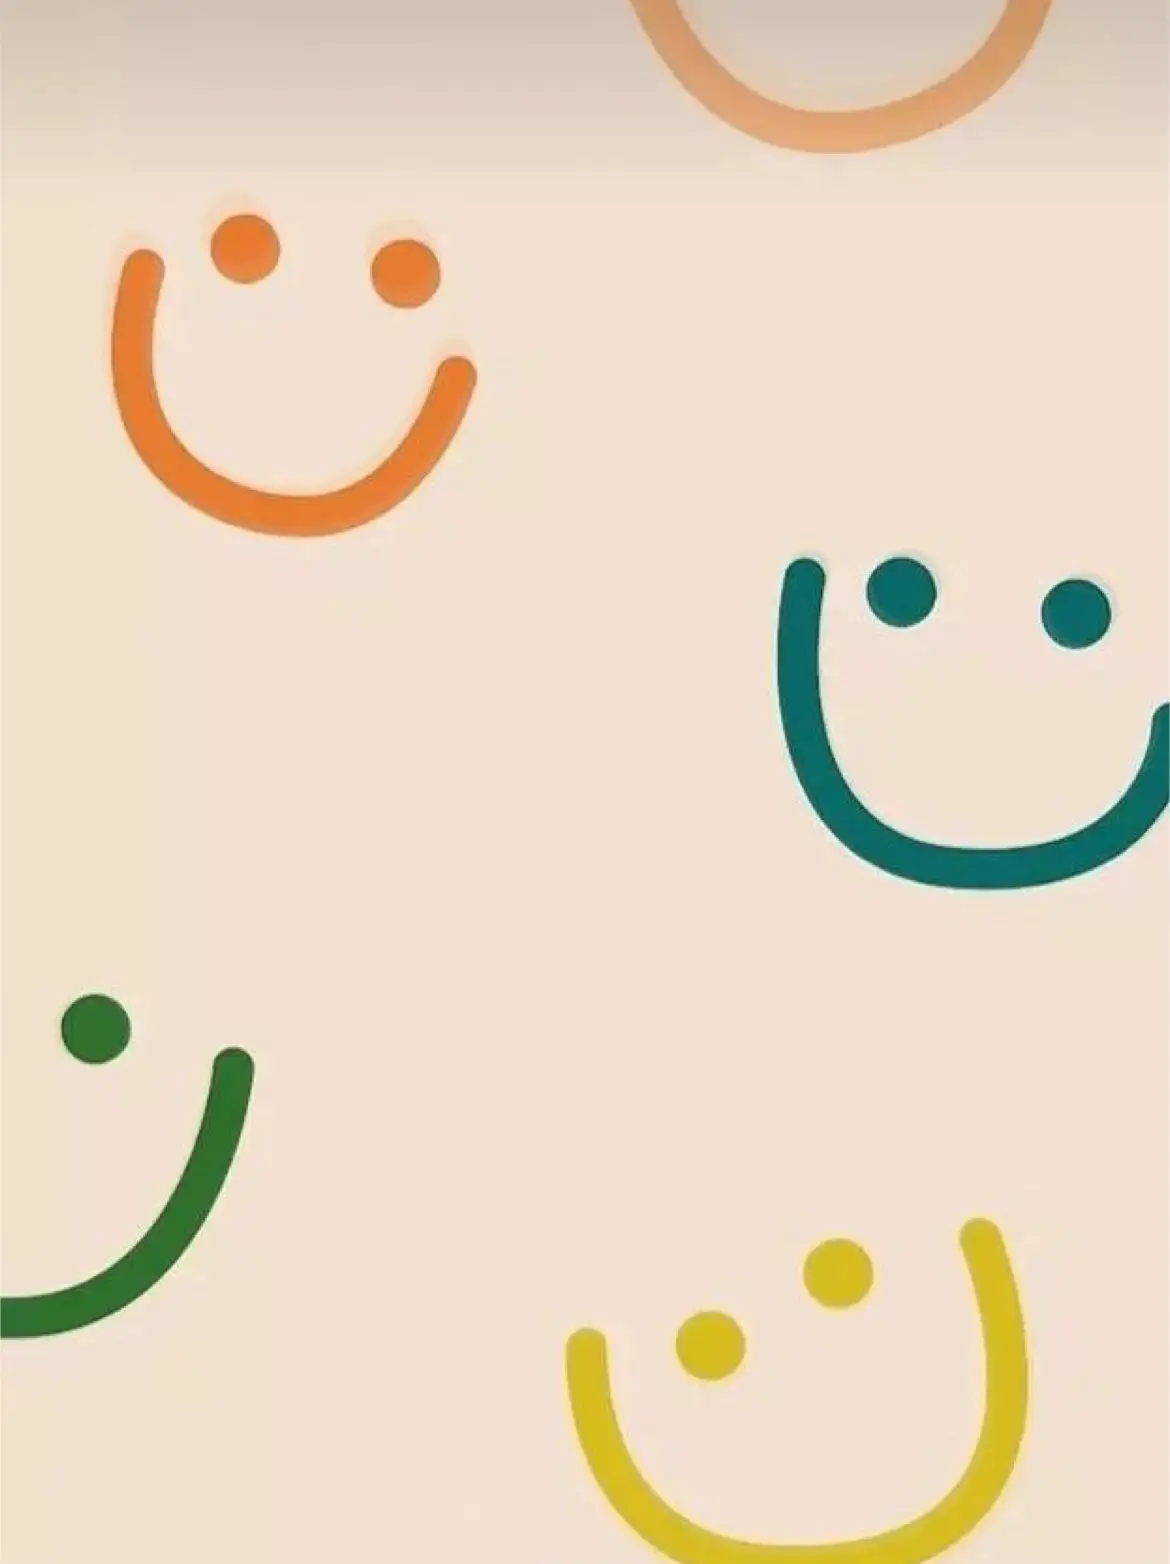 A picture of smiley faces in different colors - Smiley